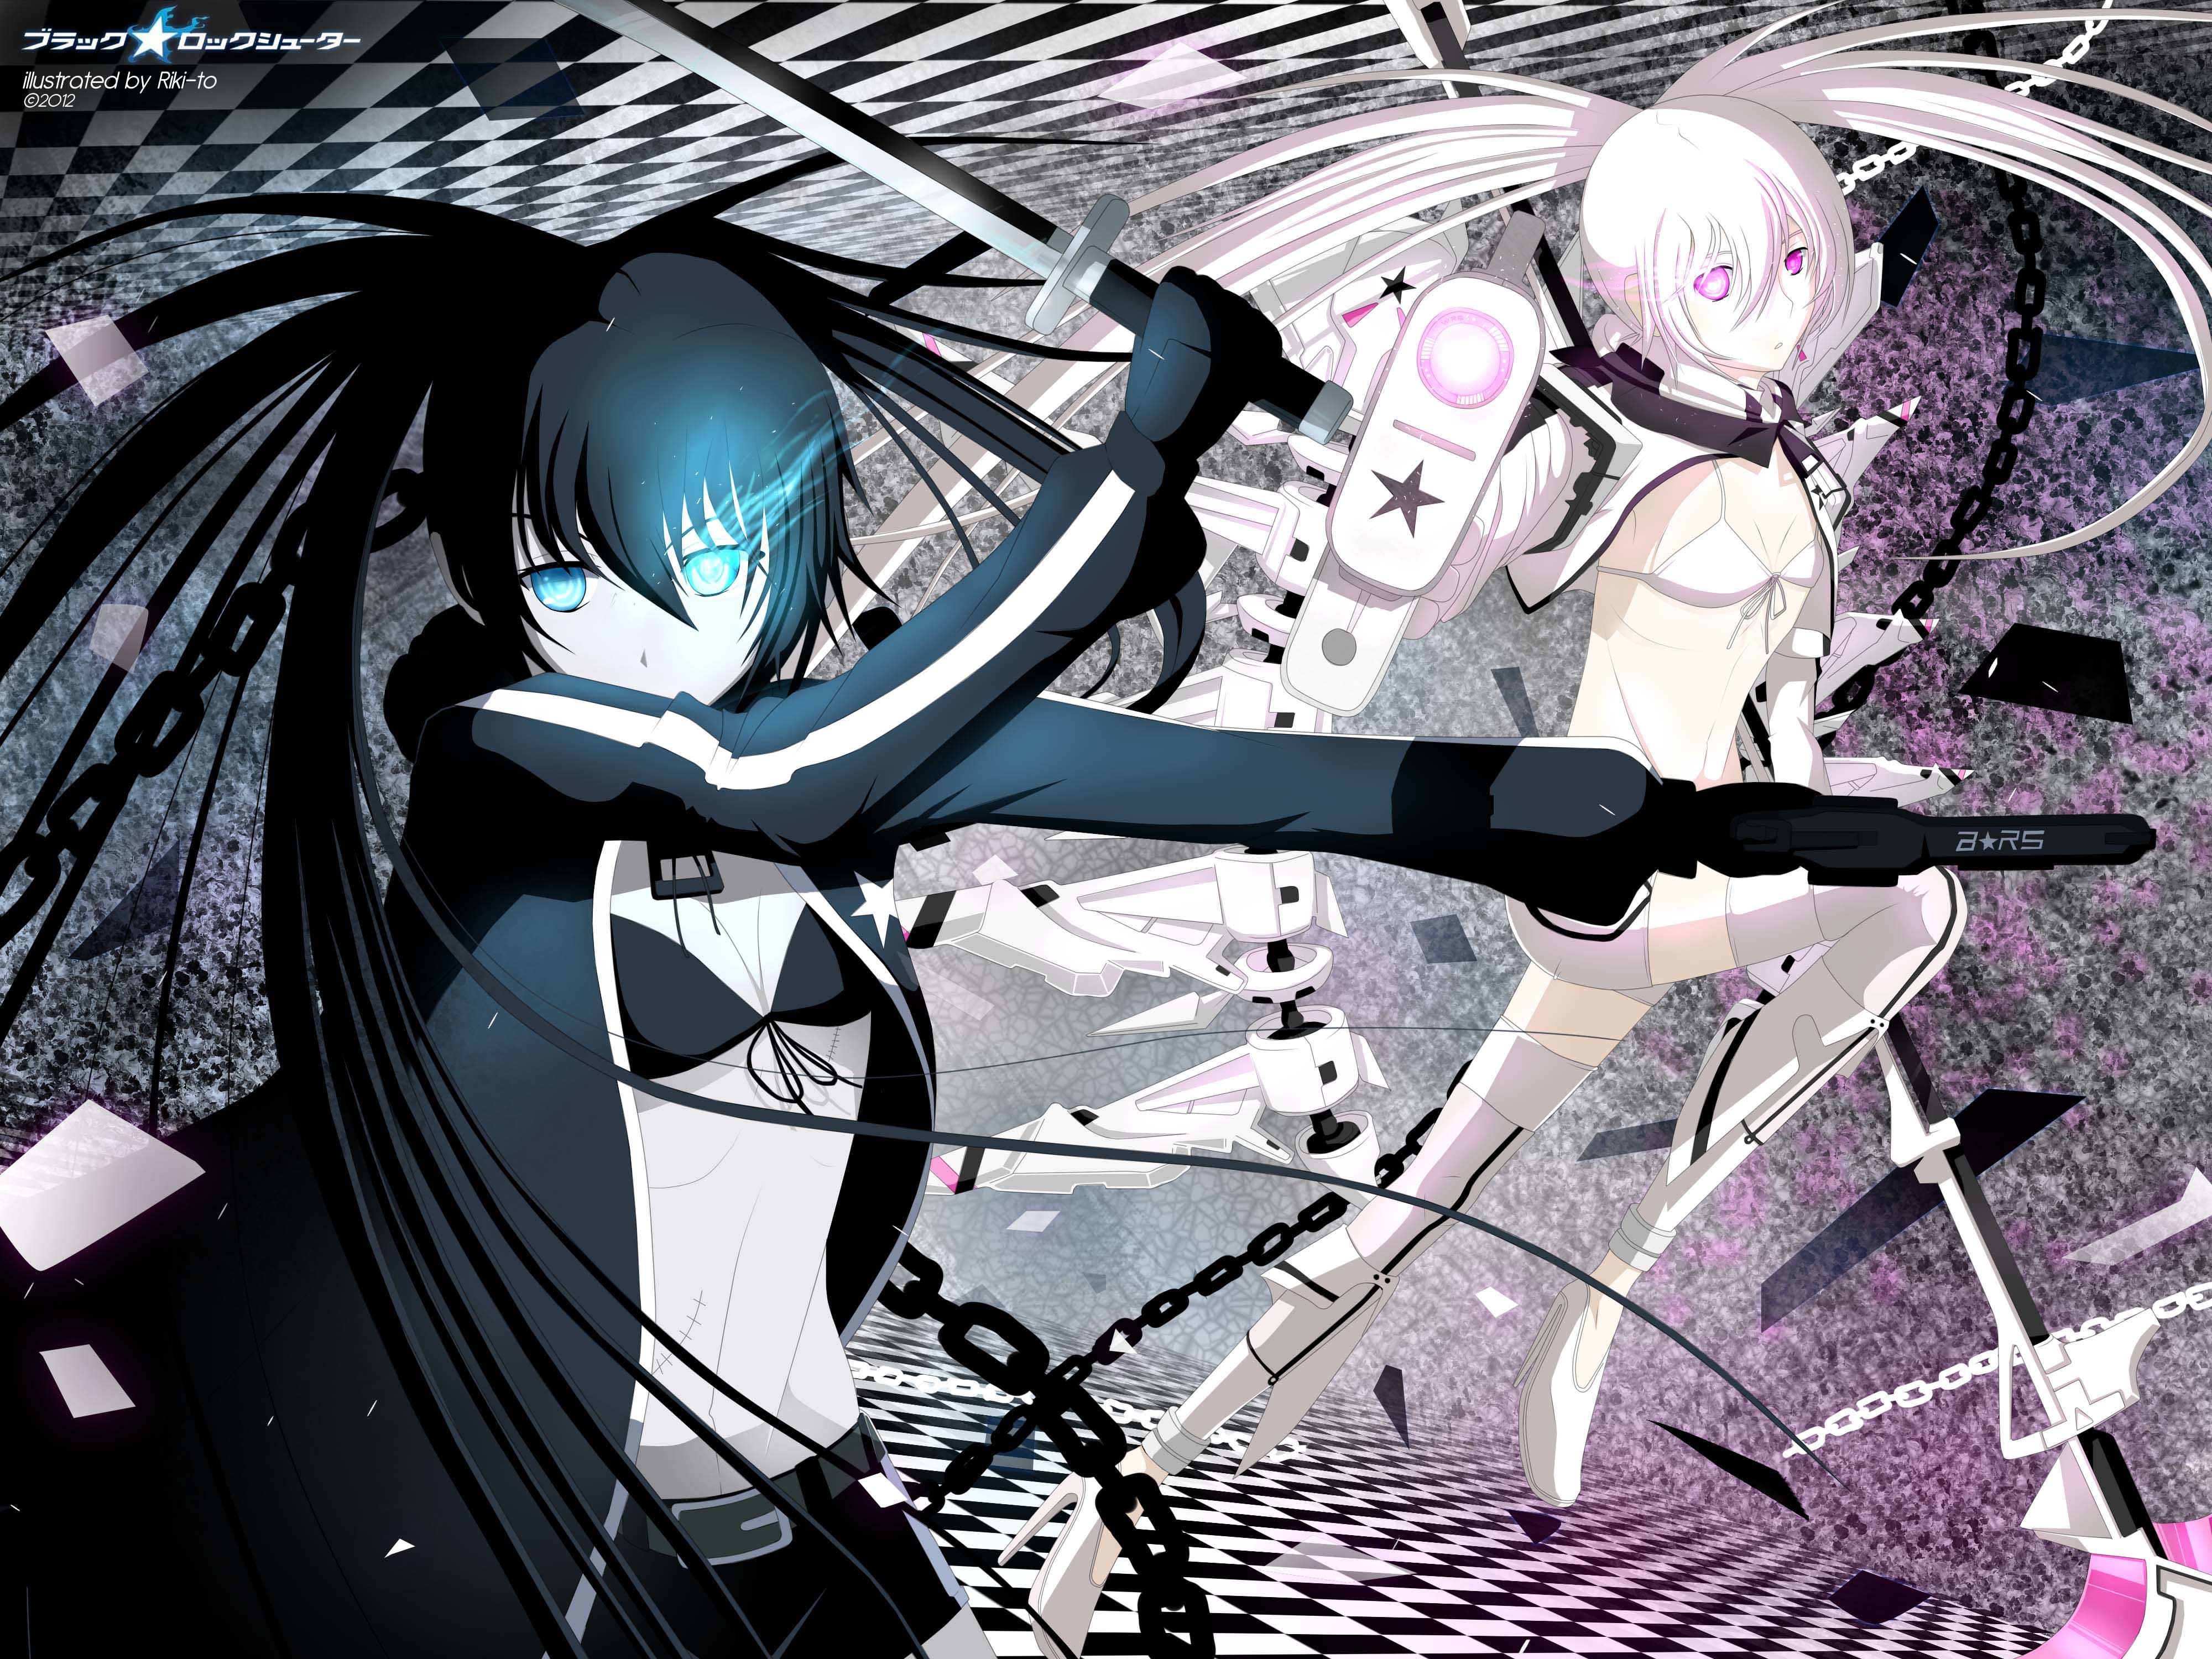 acm milan recommends Black Rock Shooter White